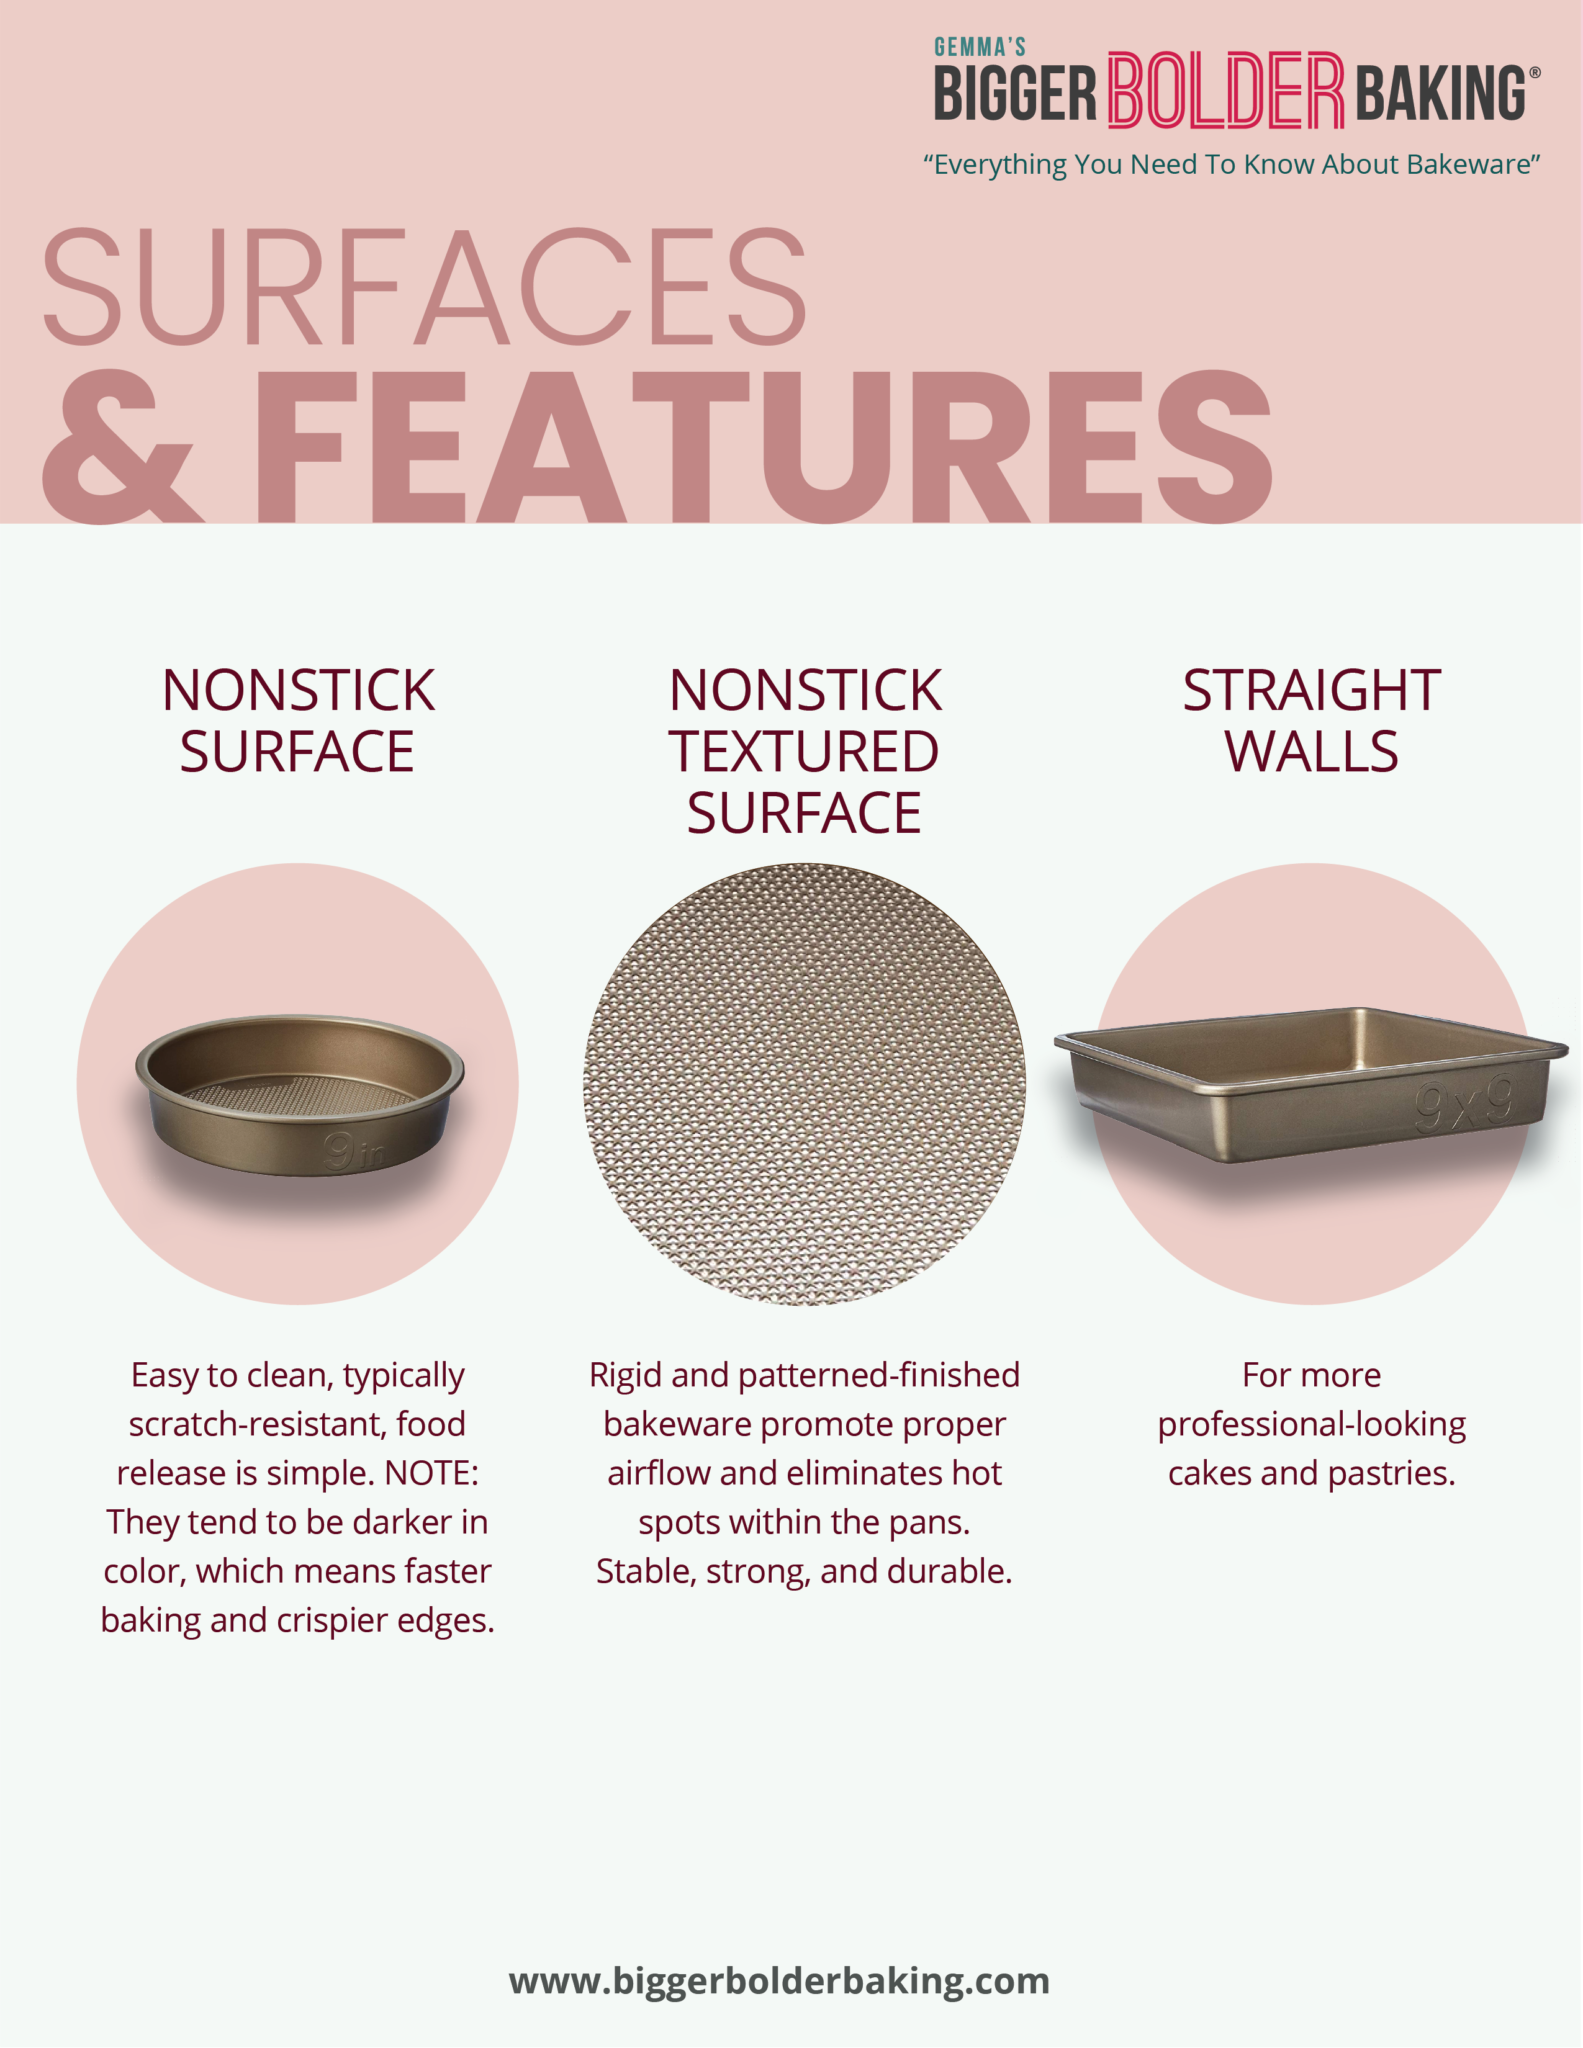 Infographic for common bakeware surfaces and features.